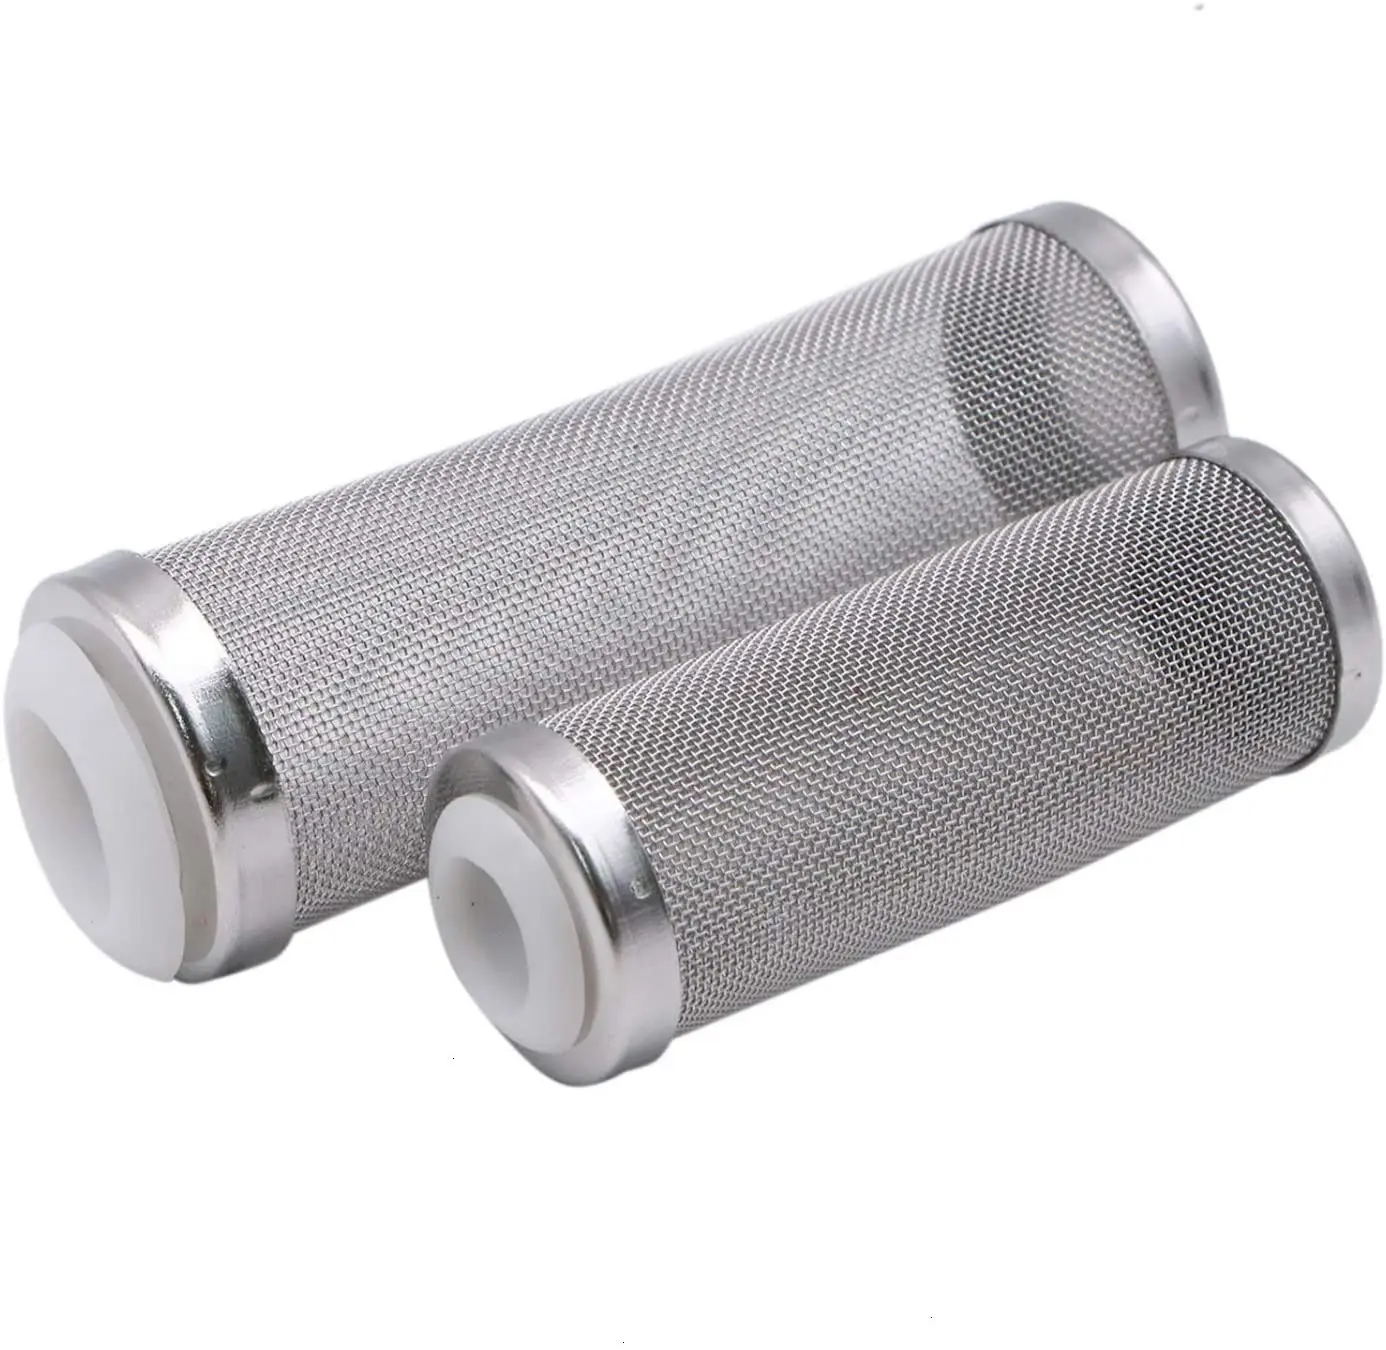 

16mm Inflow Mesh Fish Tank Filter Intake Strainer, Stainless Steel Mesh Filter for Protect Aquarium Filter.Size:L